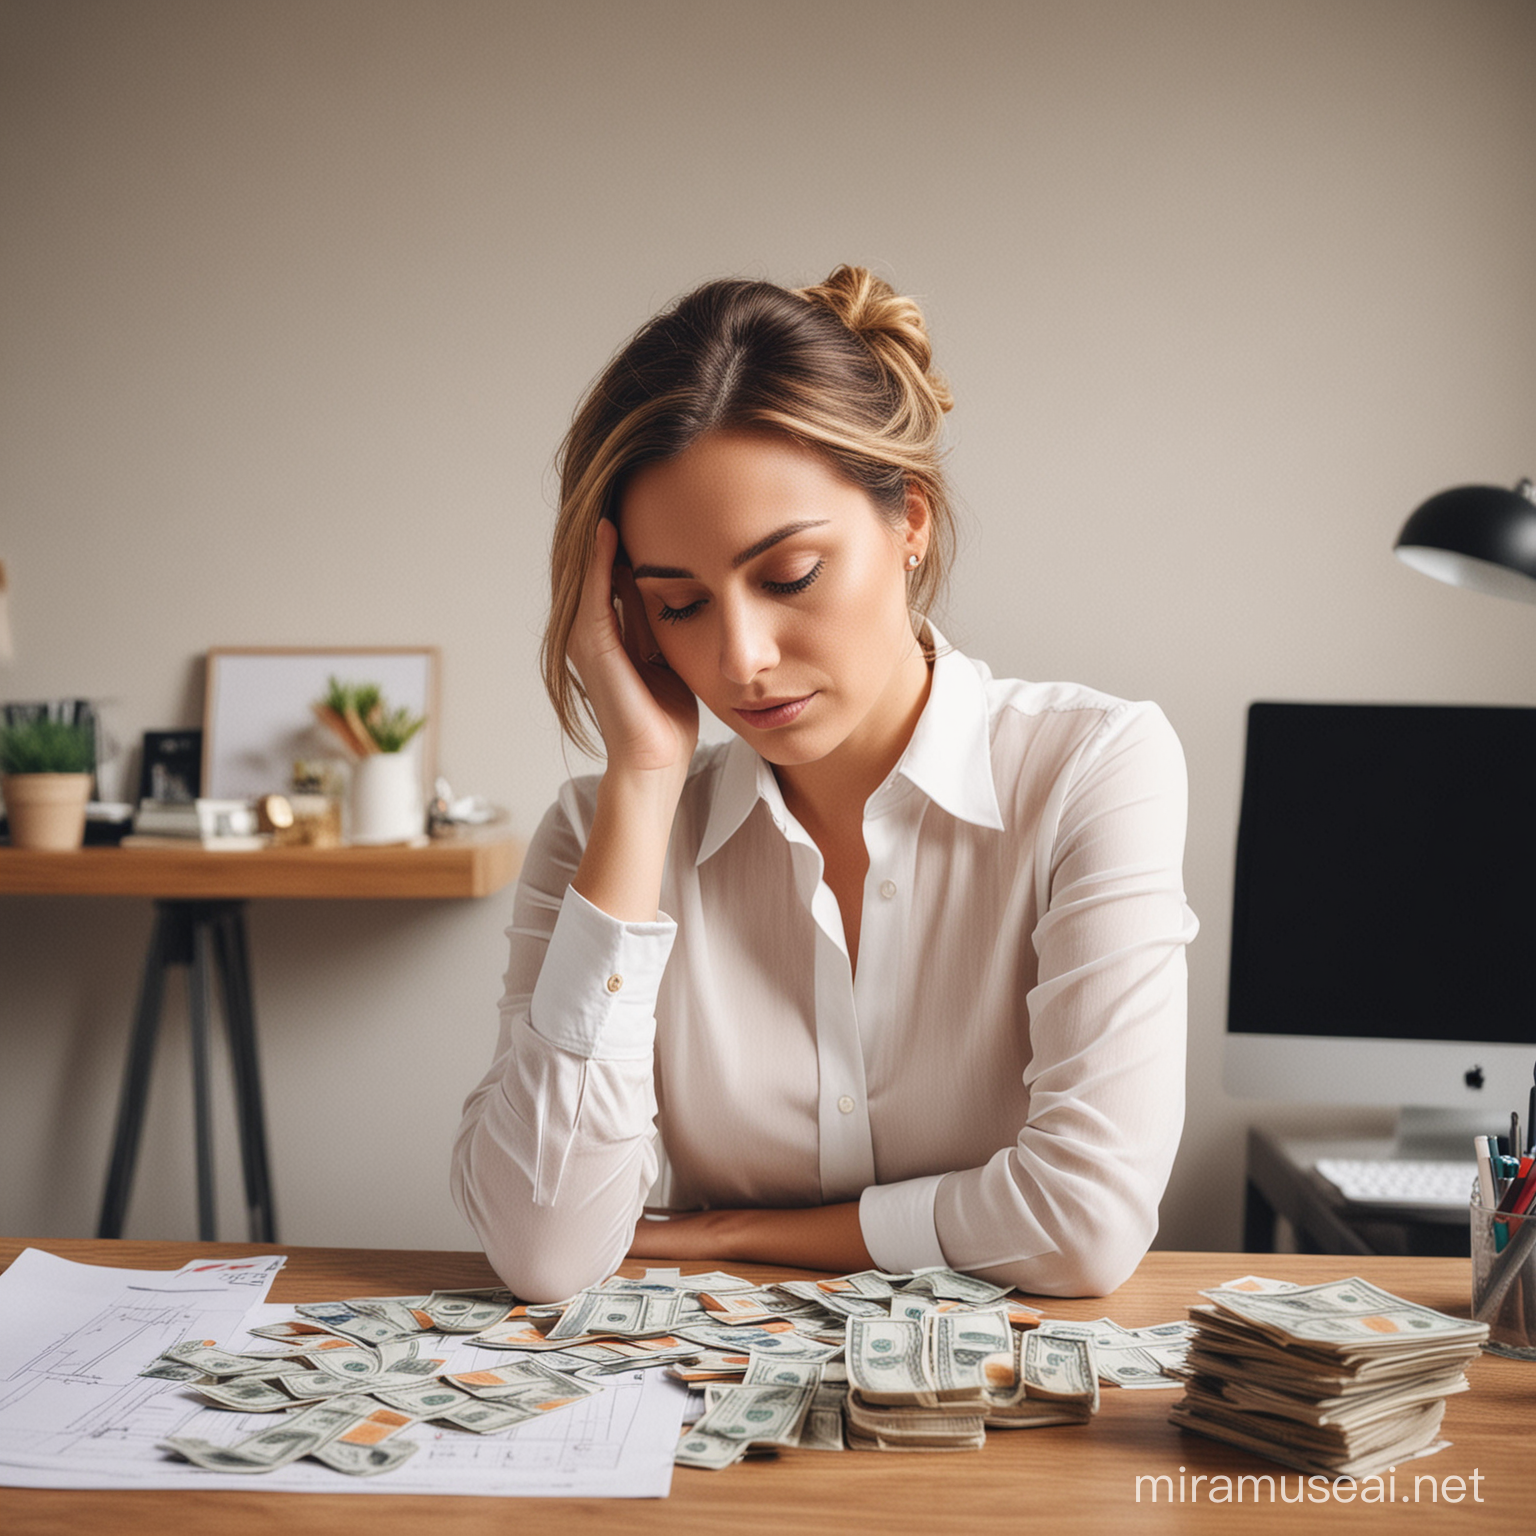 AN IMAGE OF A MAN OR LADY THINKING OF HOW TO PLAN THE MONEY ON HER DESK